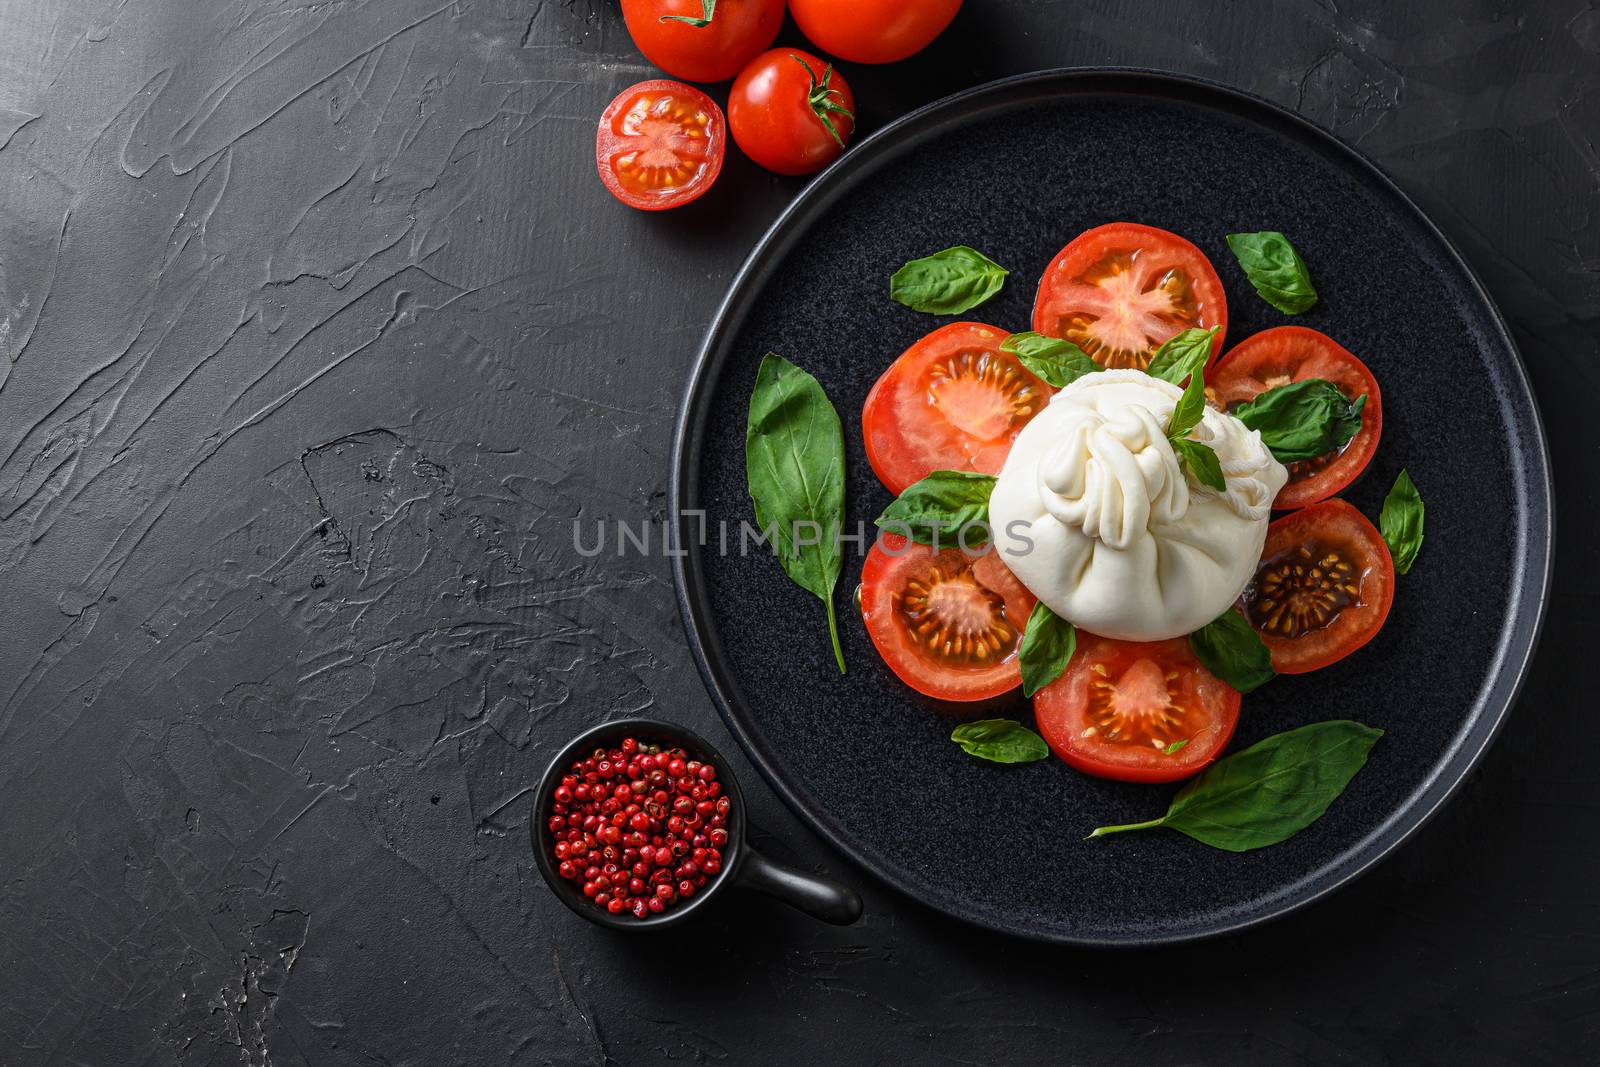 Burrata, Italian fresh cheese made from cream and milk of buffalo or cow. on black plate over black stone surface top view space for text. by Ilianesolenyi